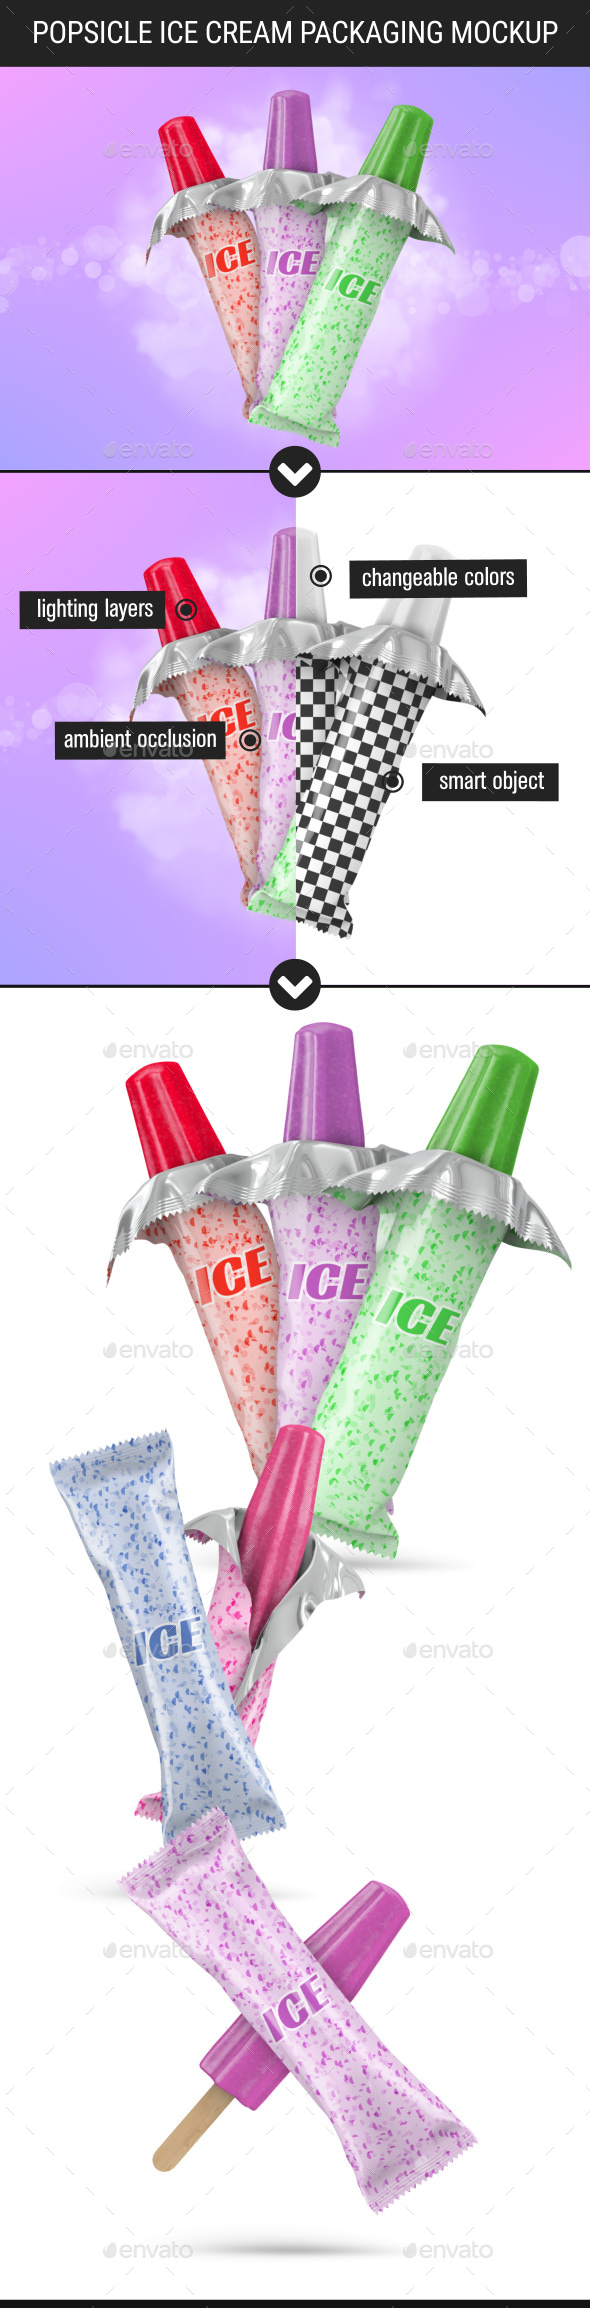 Popsicle Ice Cream Packaging Pouch Mockup